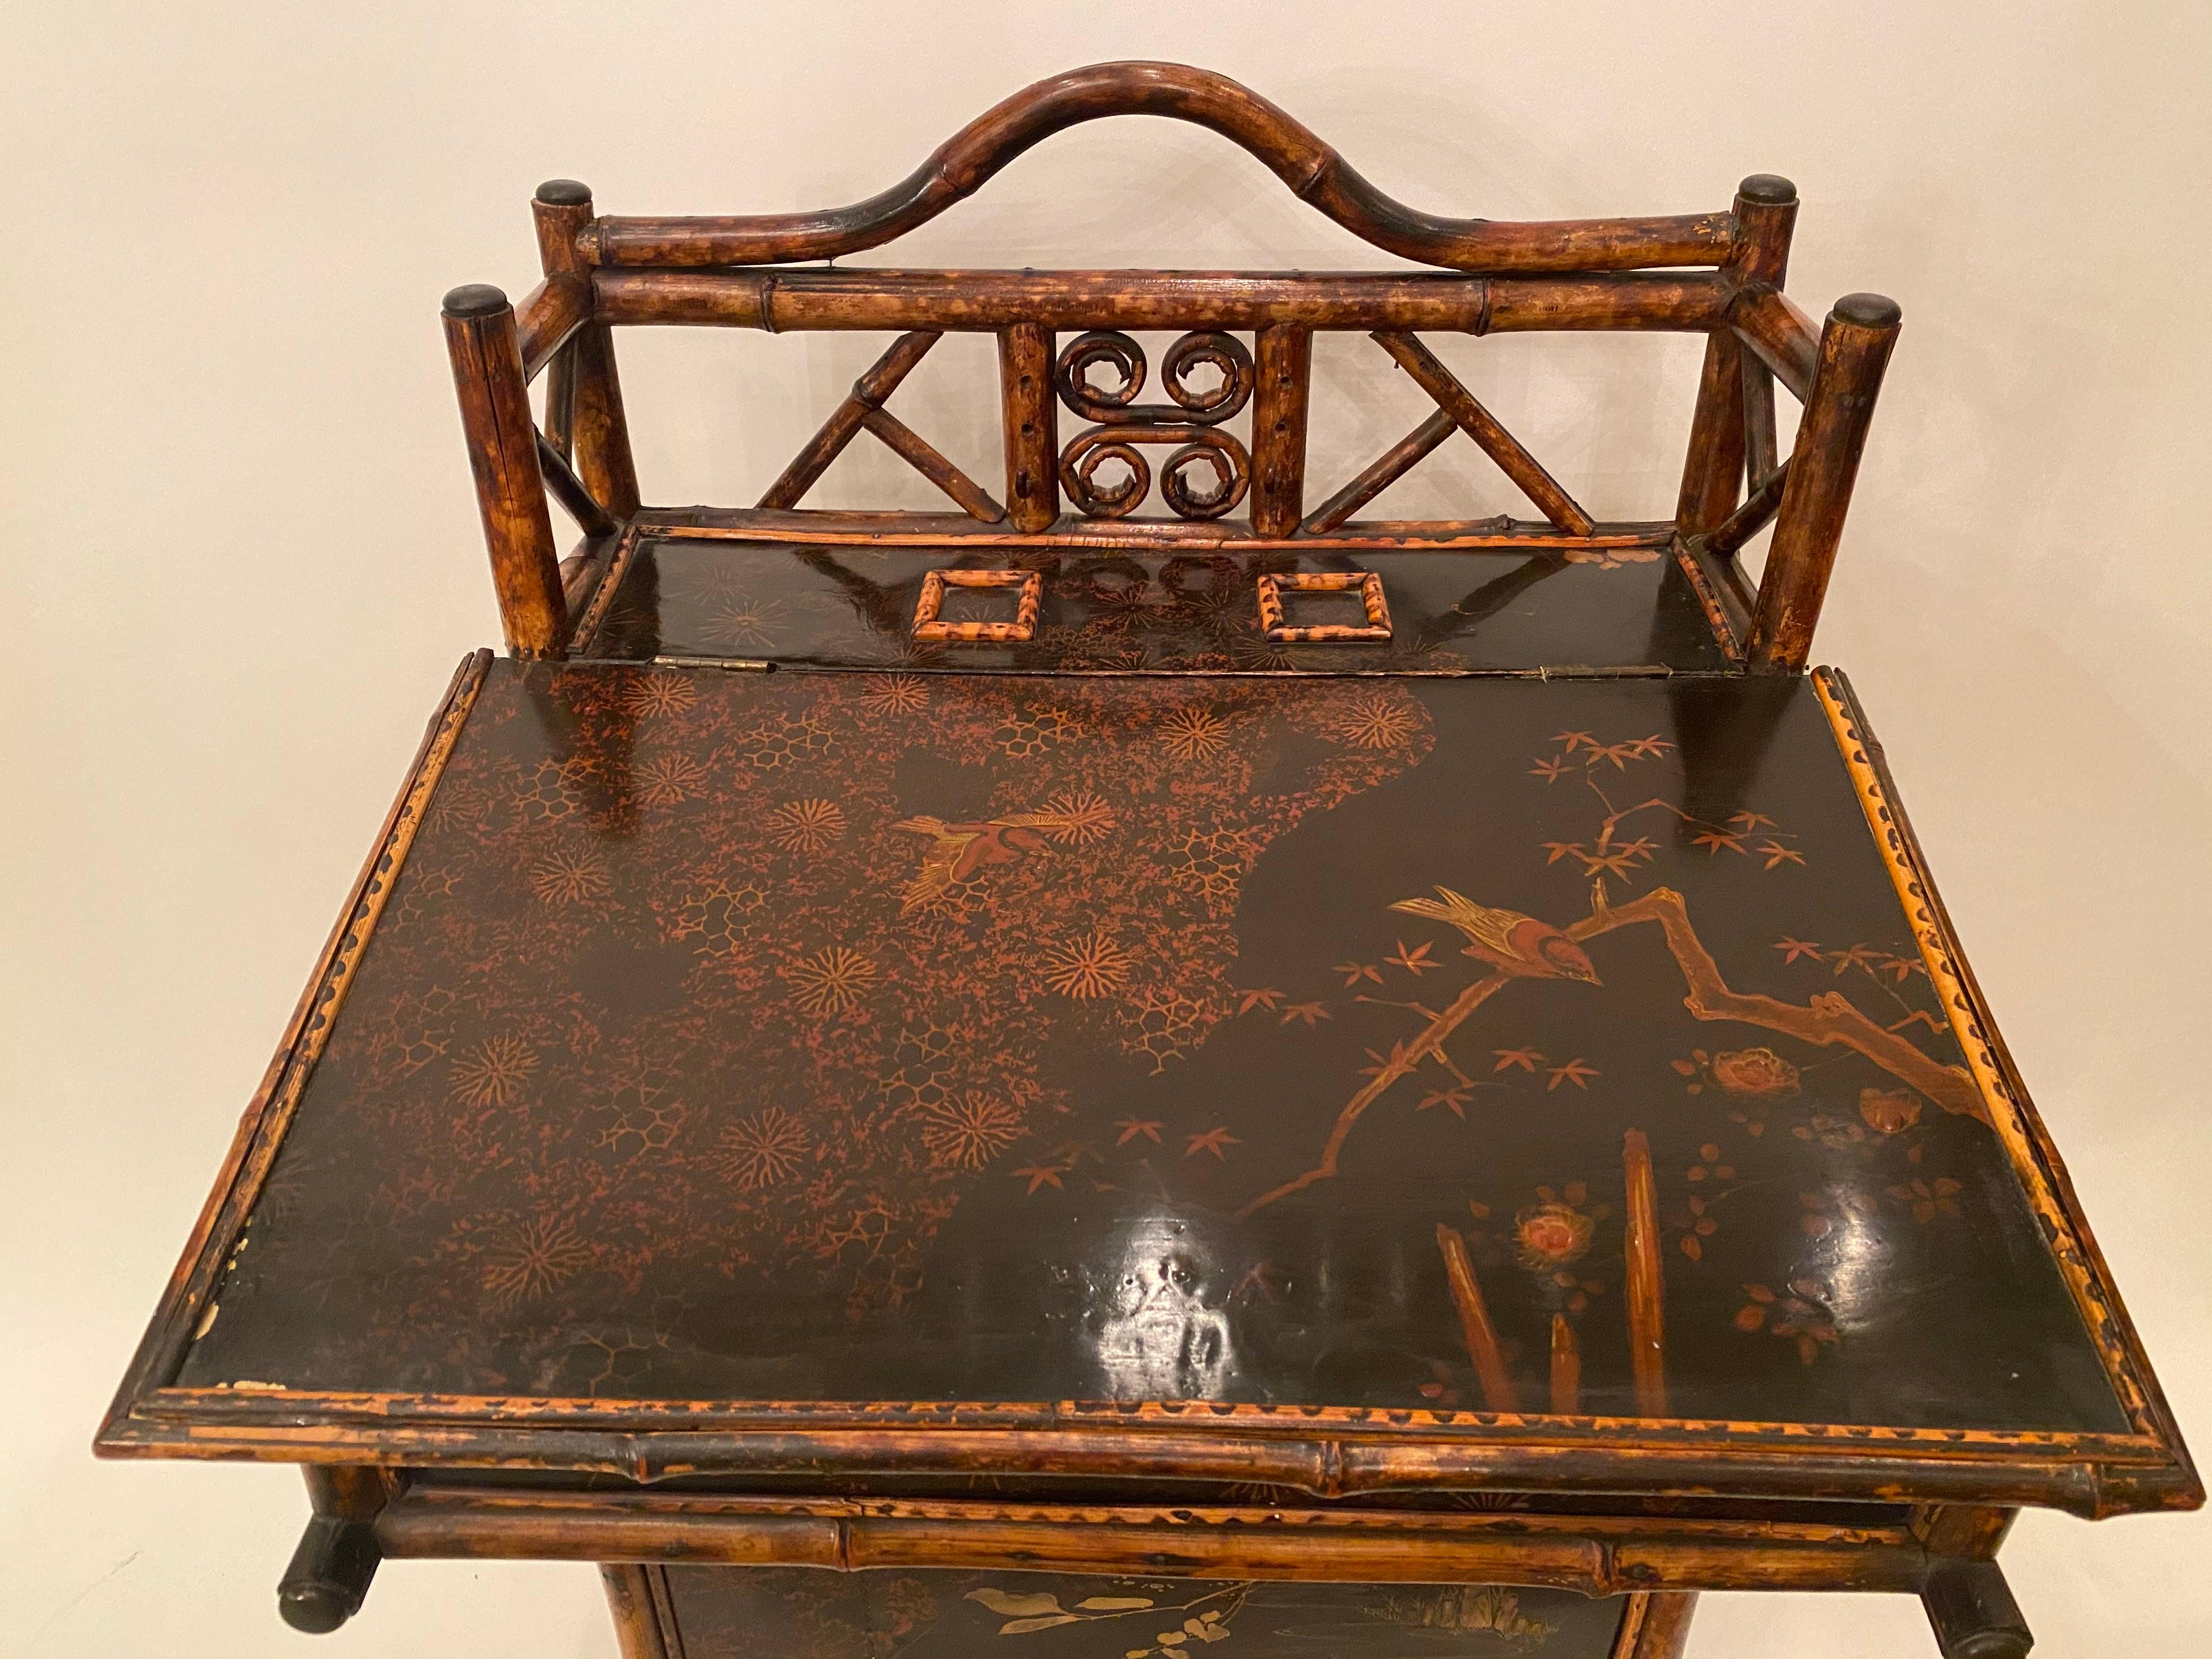 Late Meiji Period Japanese Export Lacquer Bamboo Desk, circa 1900s 1